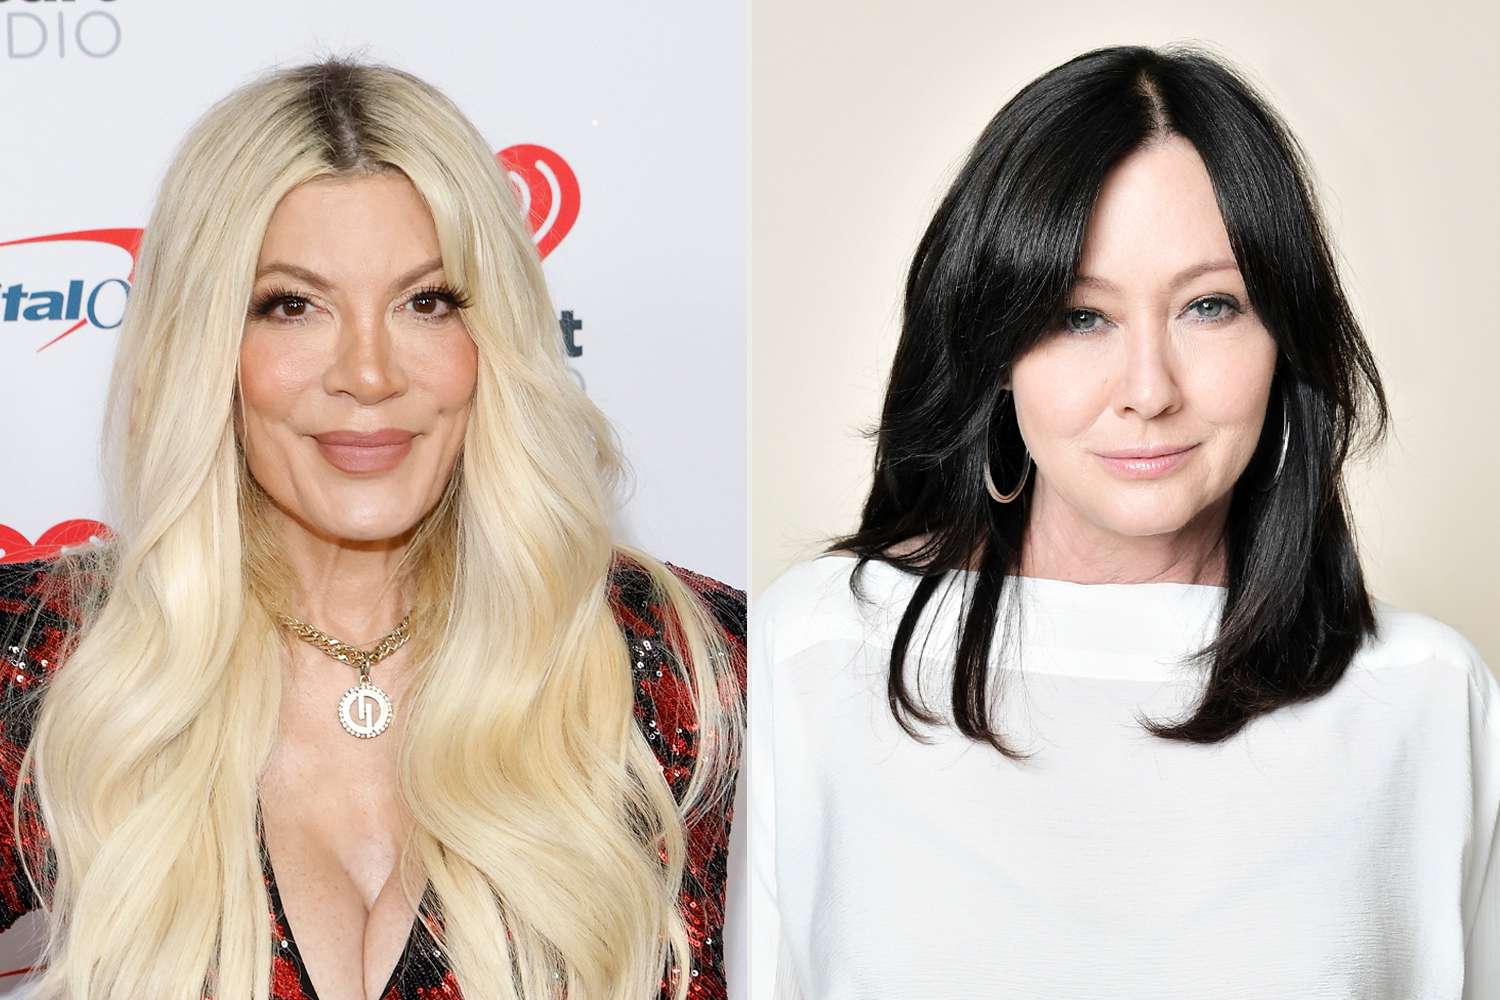 Tori Spelling and Shannen Doherty Recall Their Falling Out: ‘We Were Friends and Then 1 Minute We Weren’t’